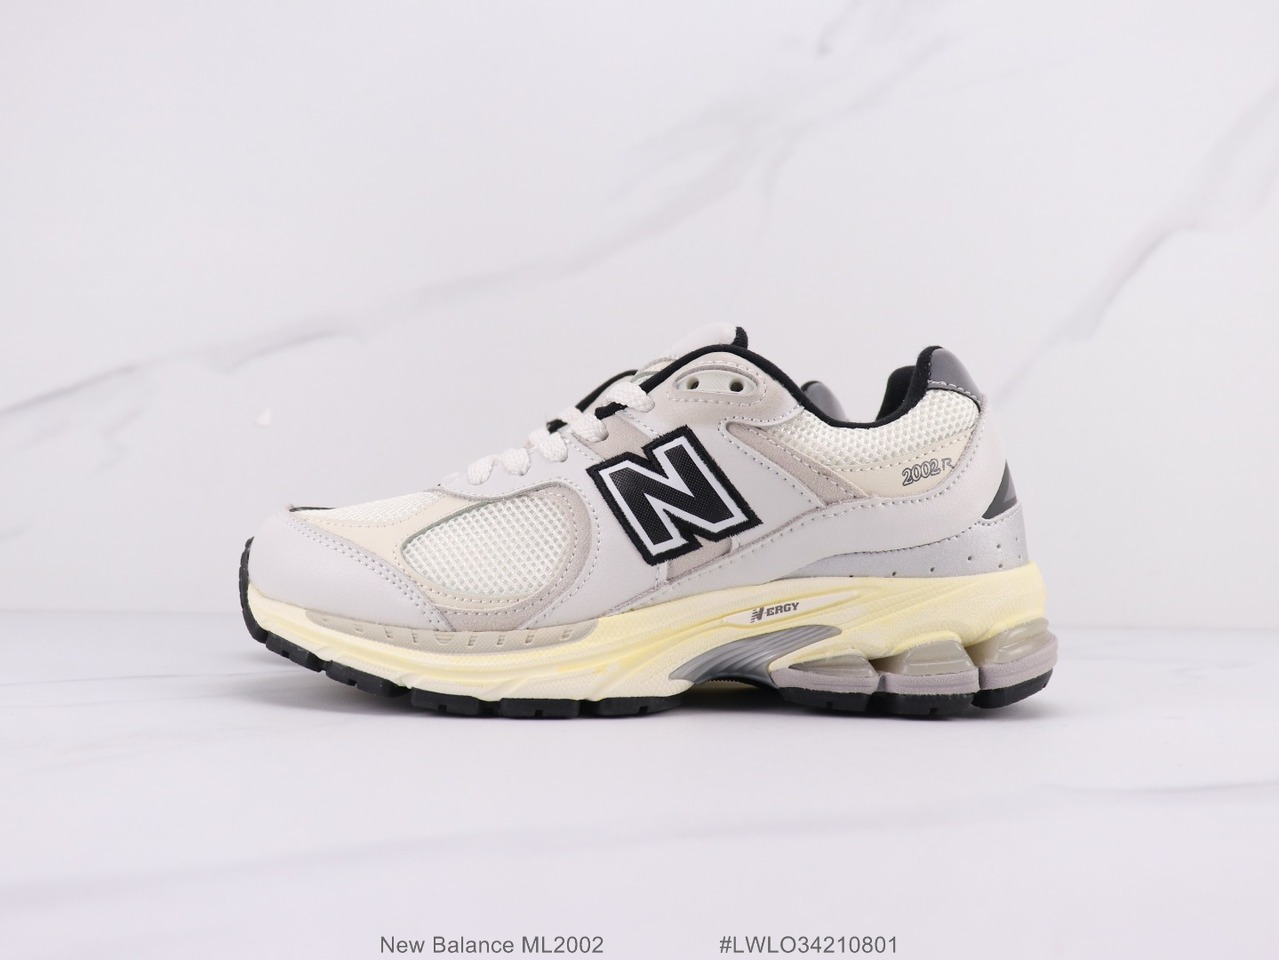 New Balance ML2002 running shoes daddy shoes side